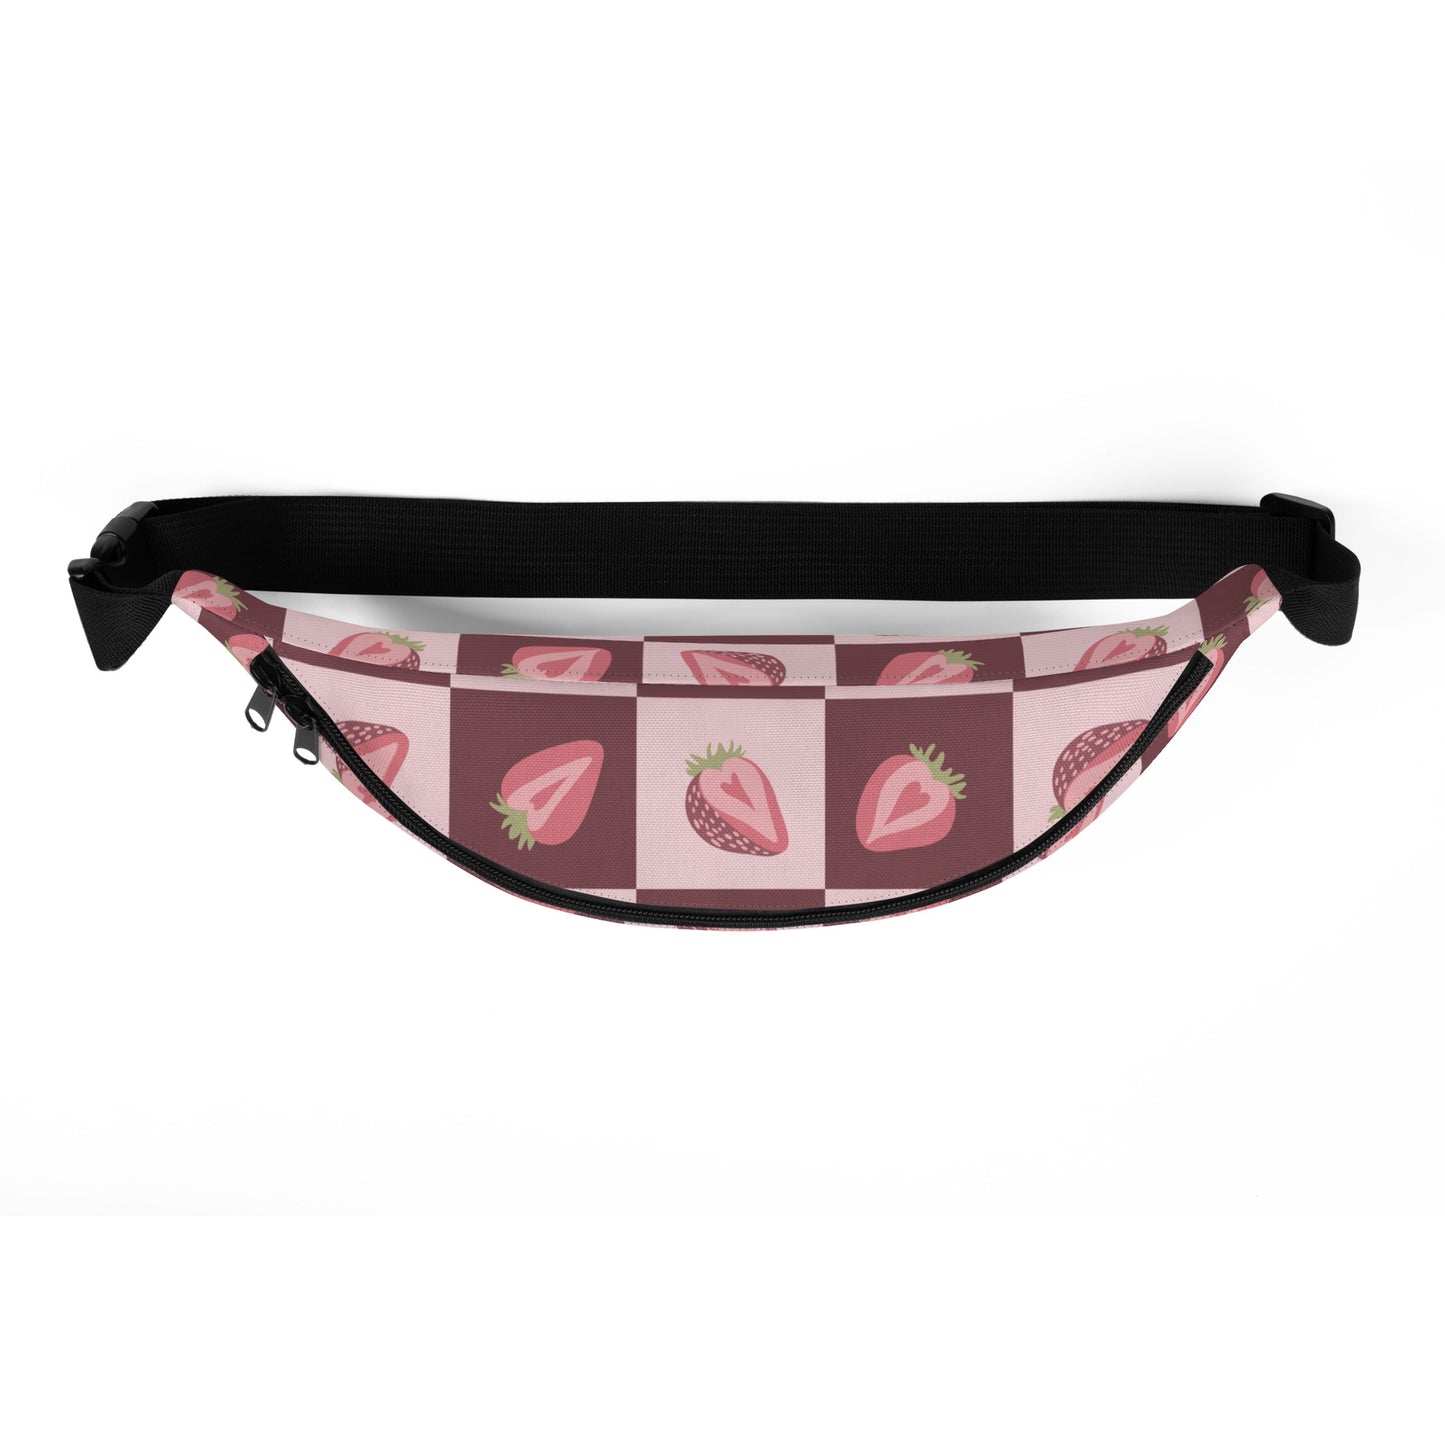 Limited-Edition Oregon Strawberry Parade Fanny Pack